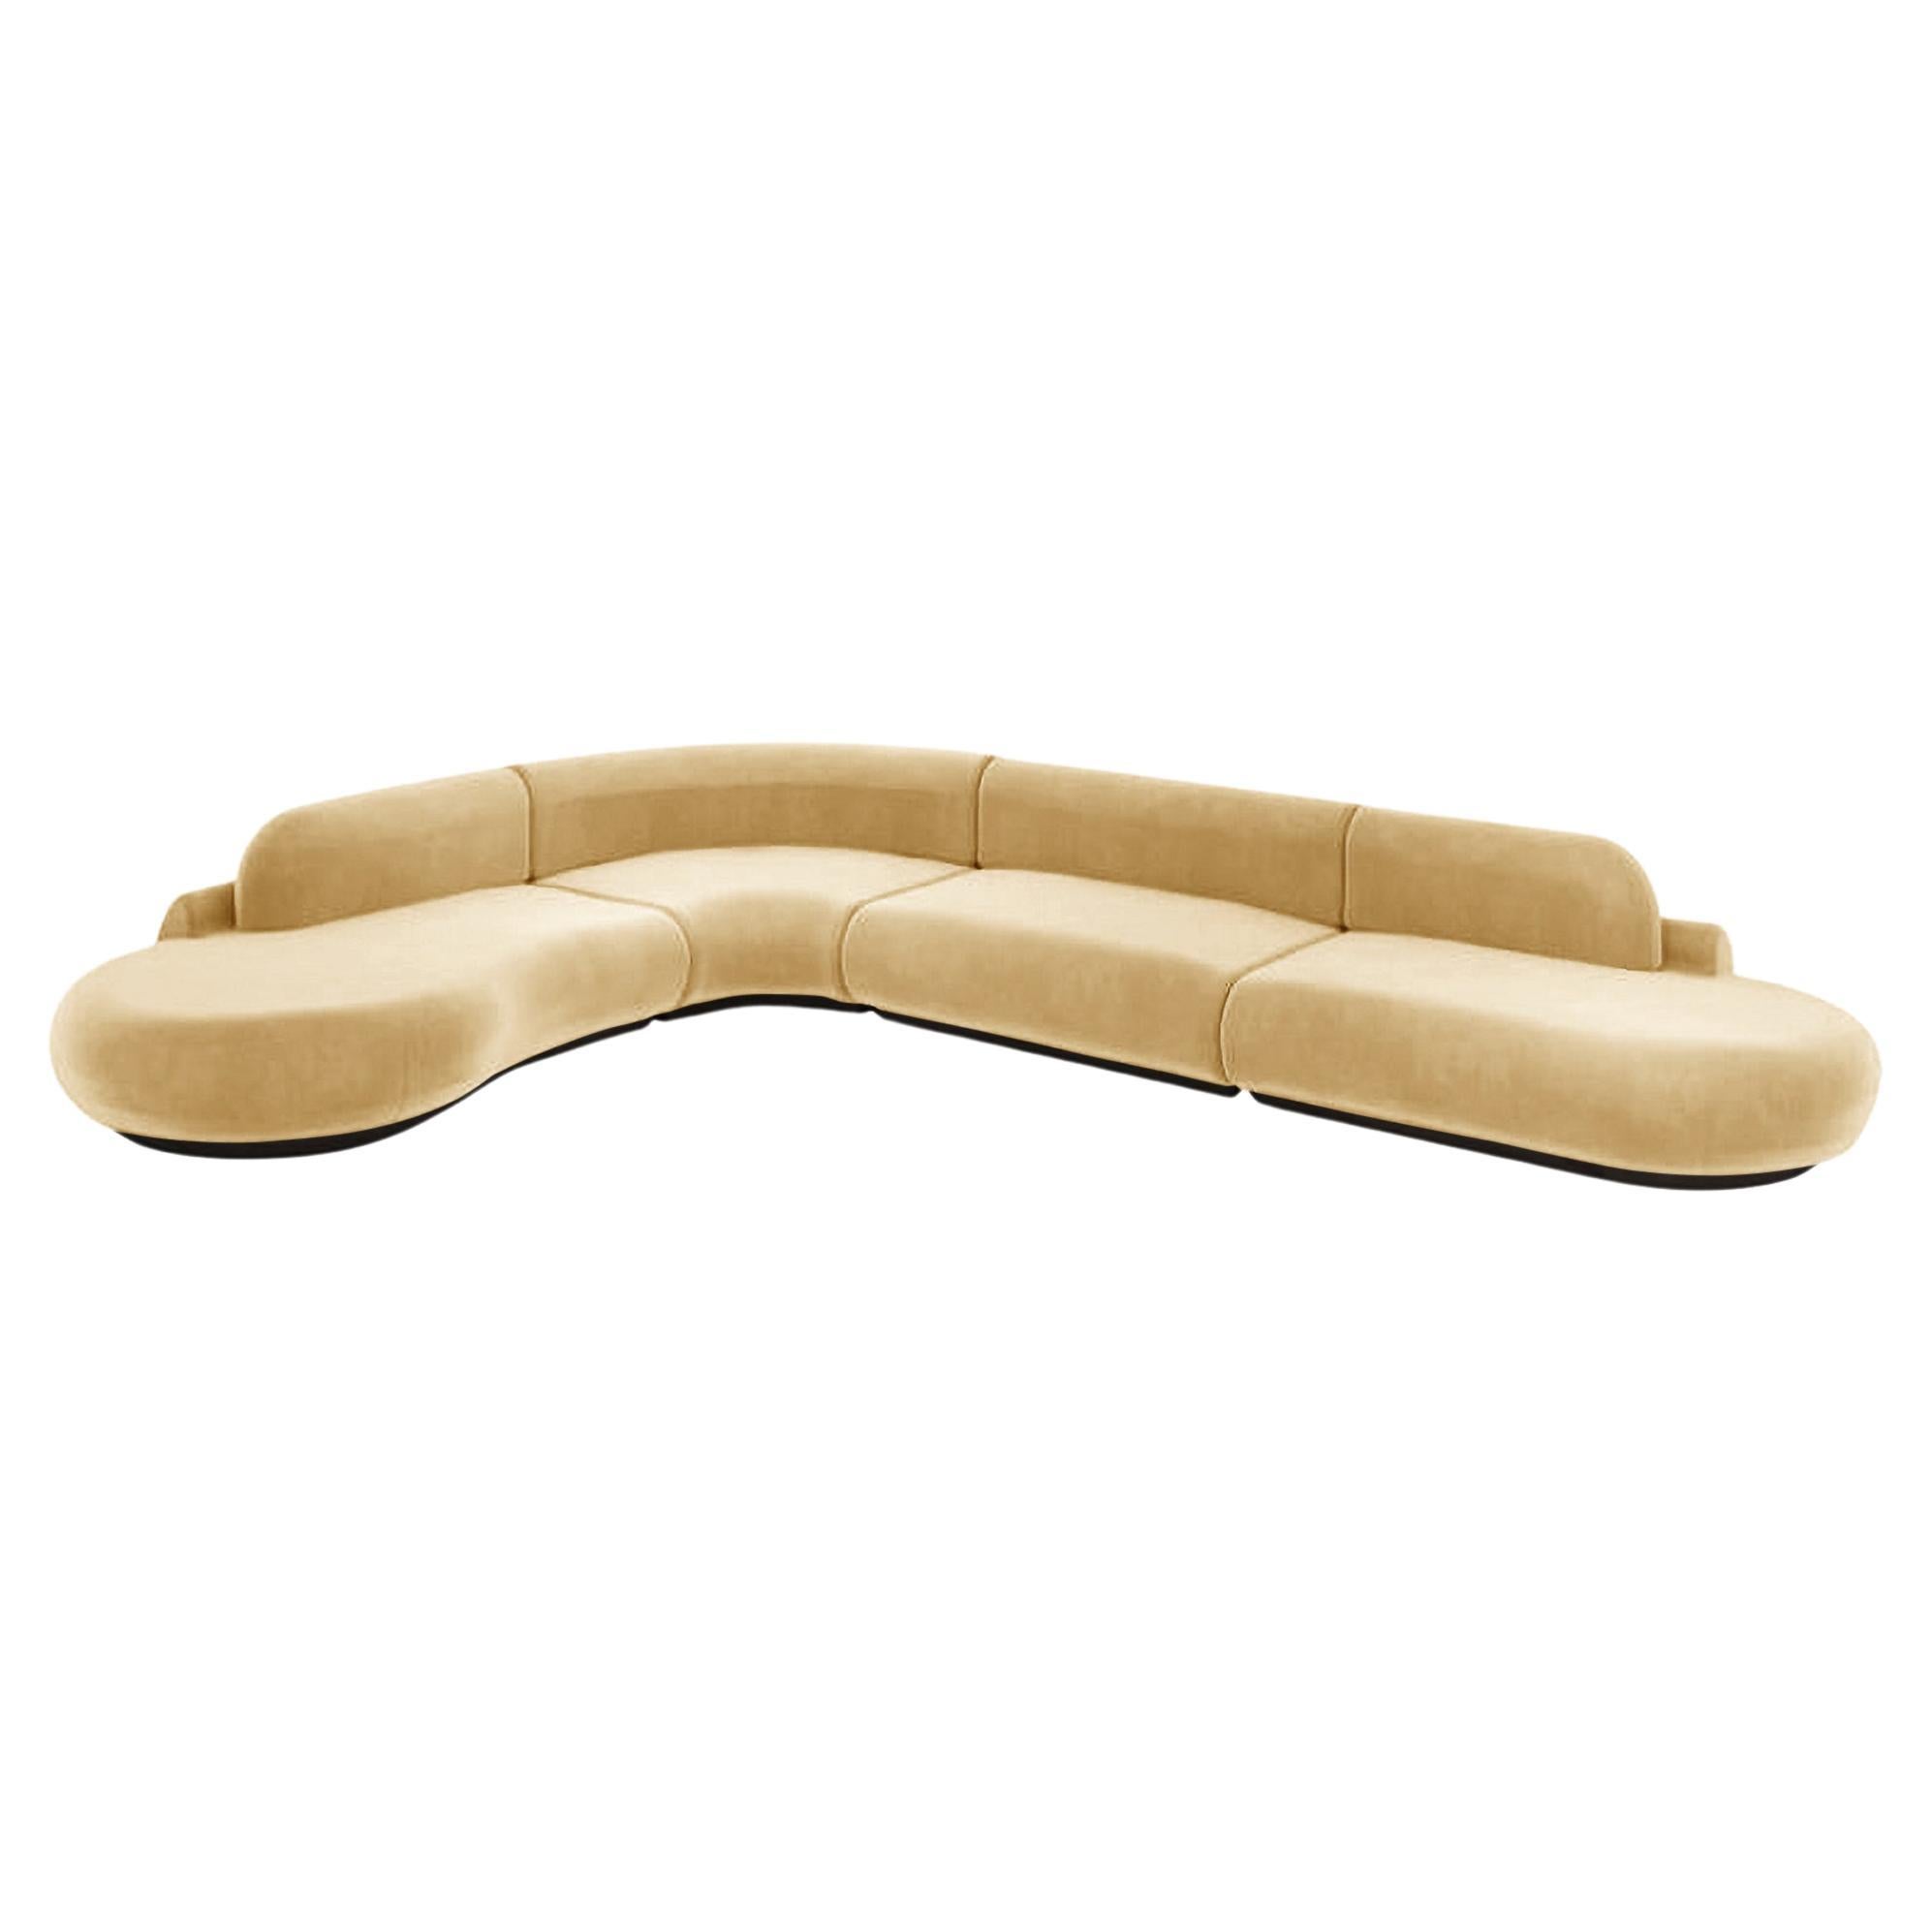 Naked Curved Sectional Sofa, 4 Piece with Beech Ash-056-5 and Vigo Plantain